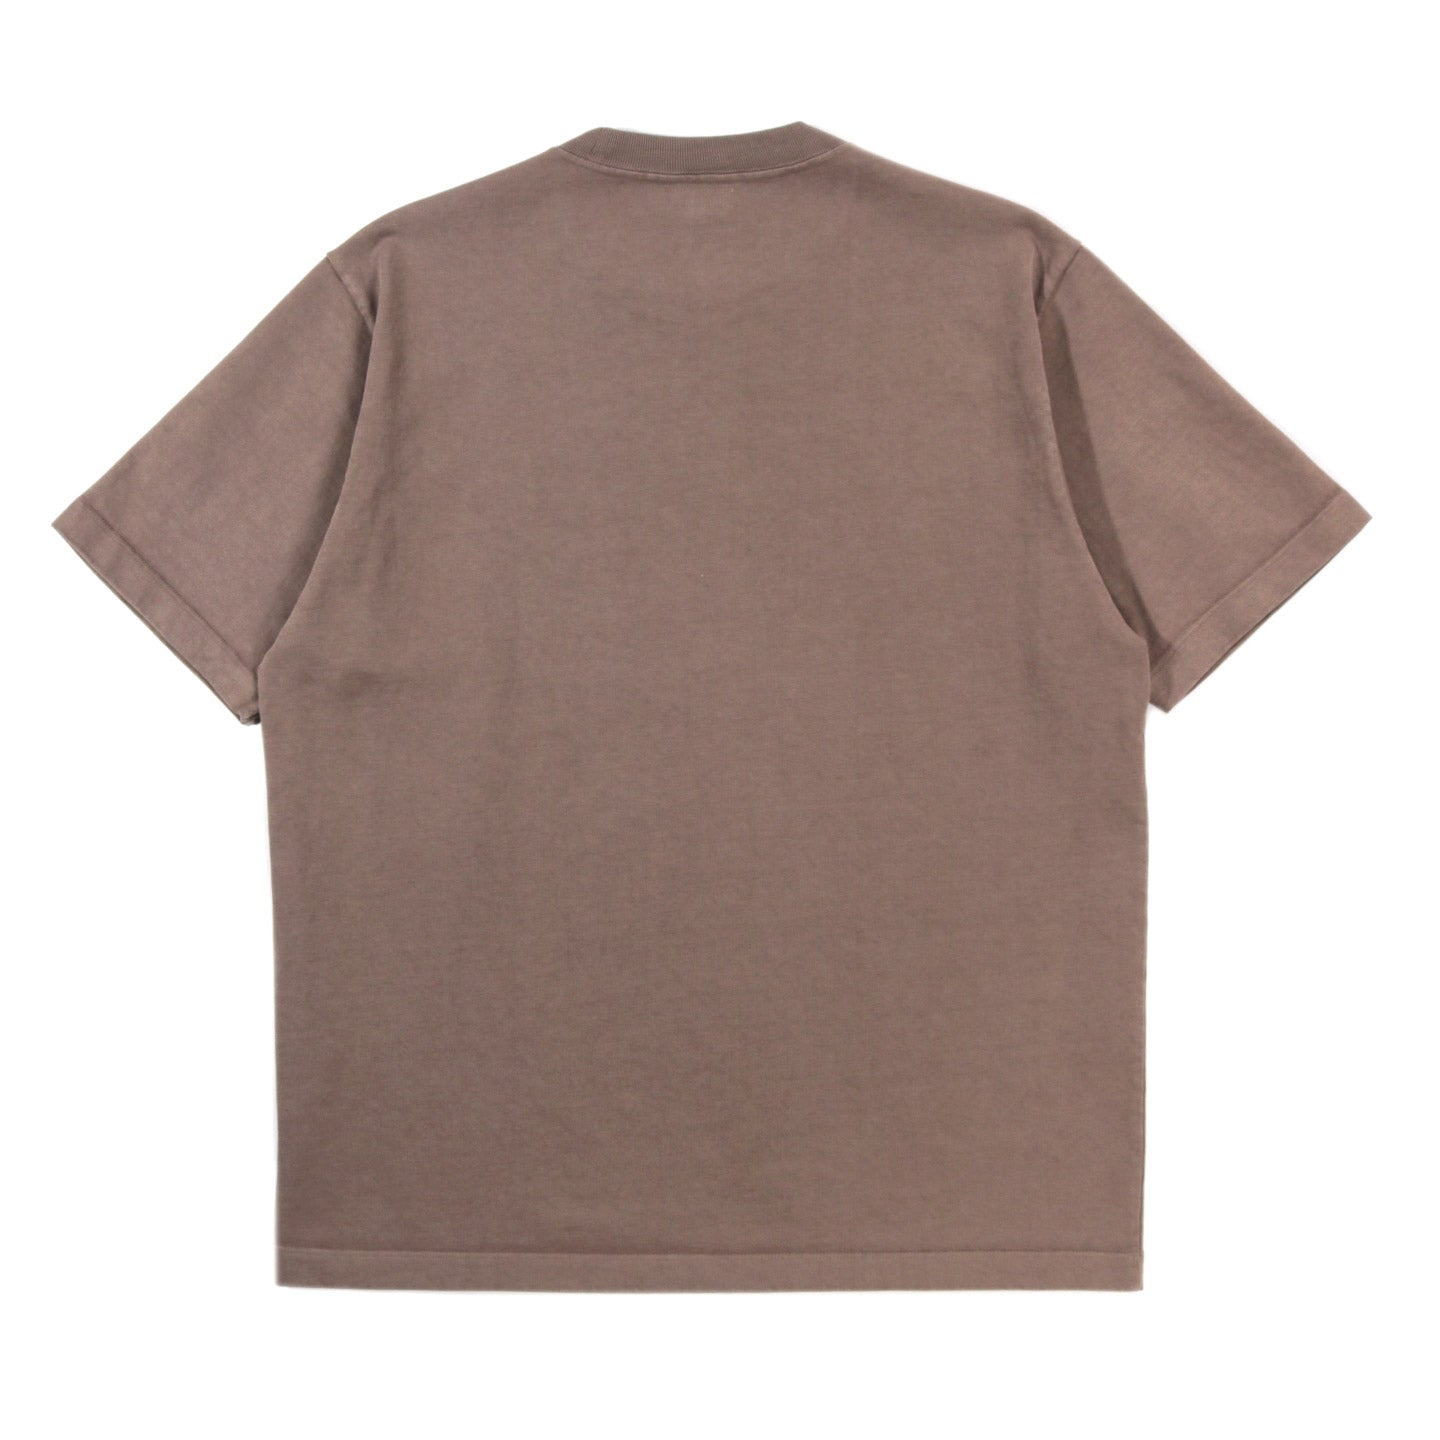 LADY WHITE CO. RUGBY T-SHIRT TAUPE